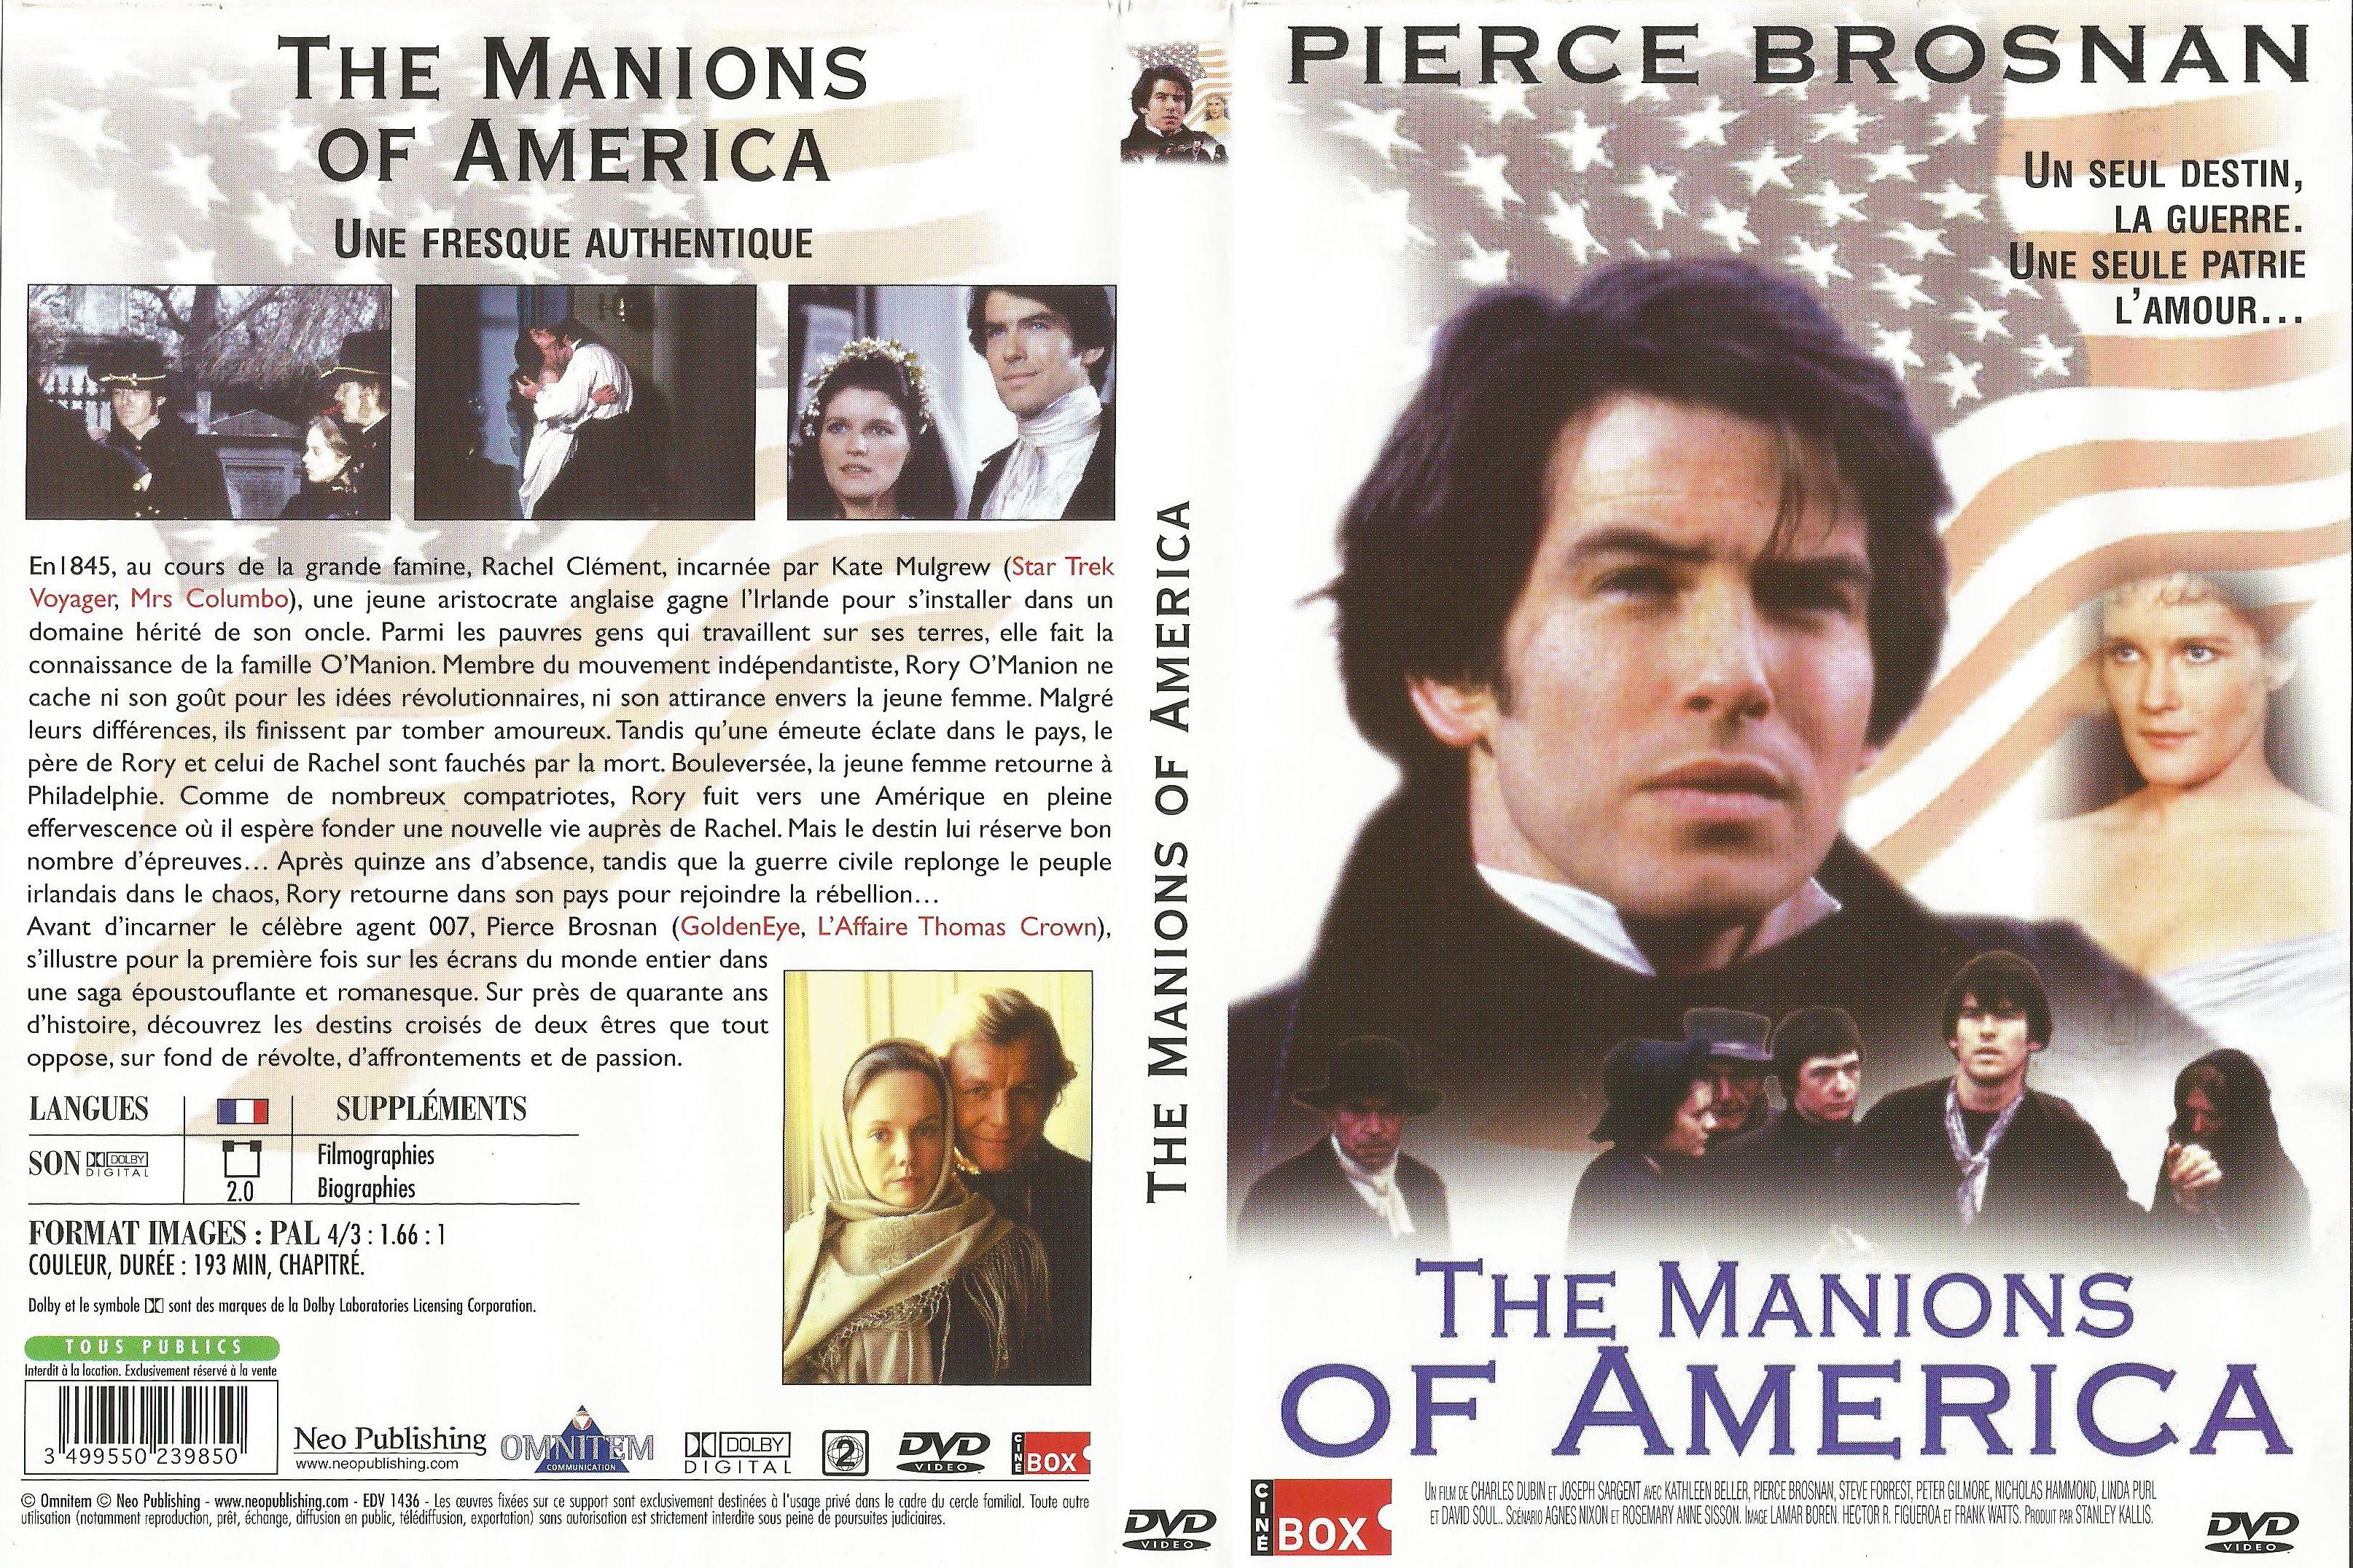 Jaquette DVD The manions of America